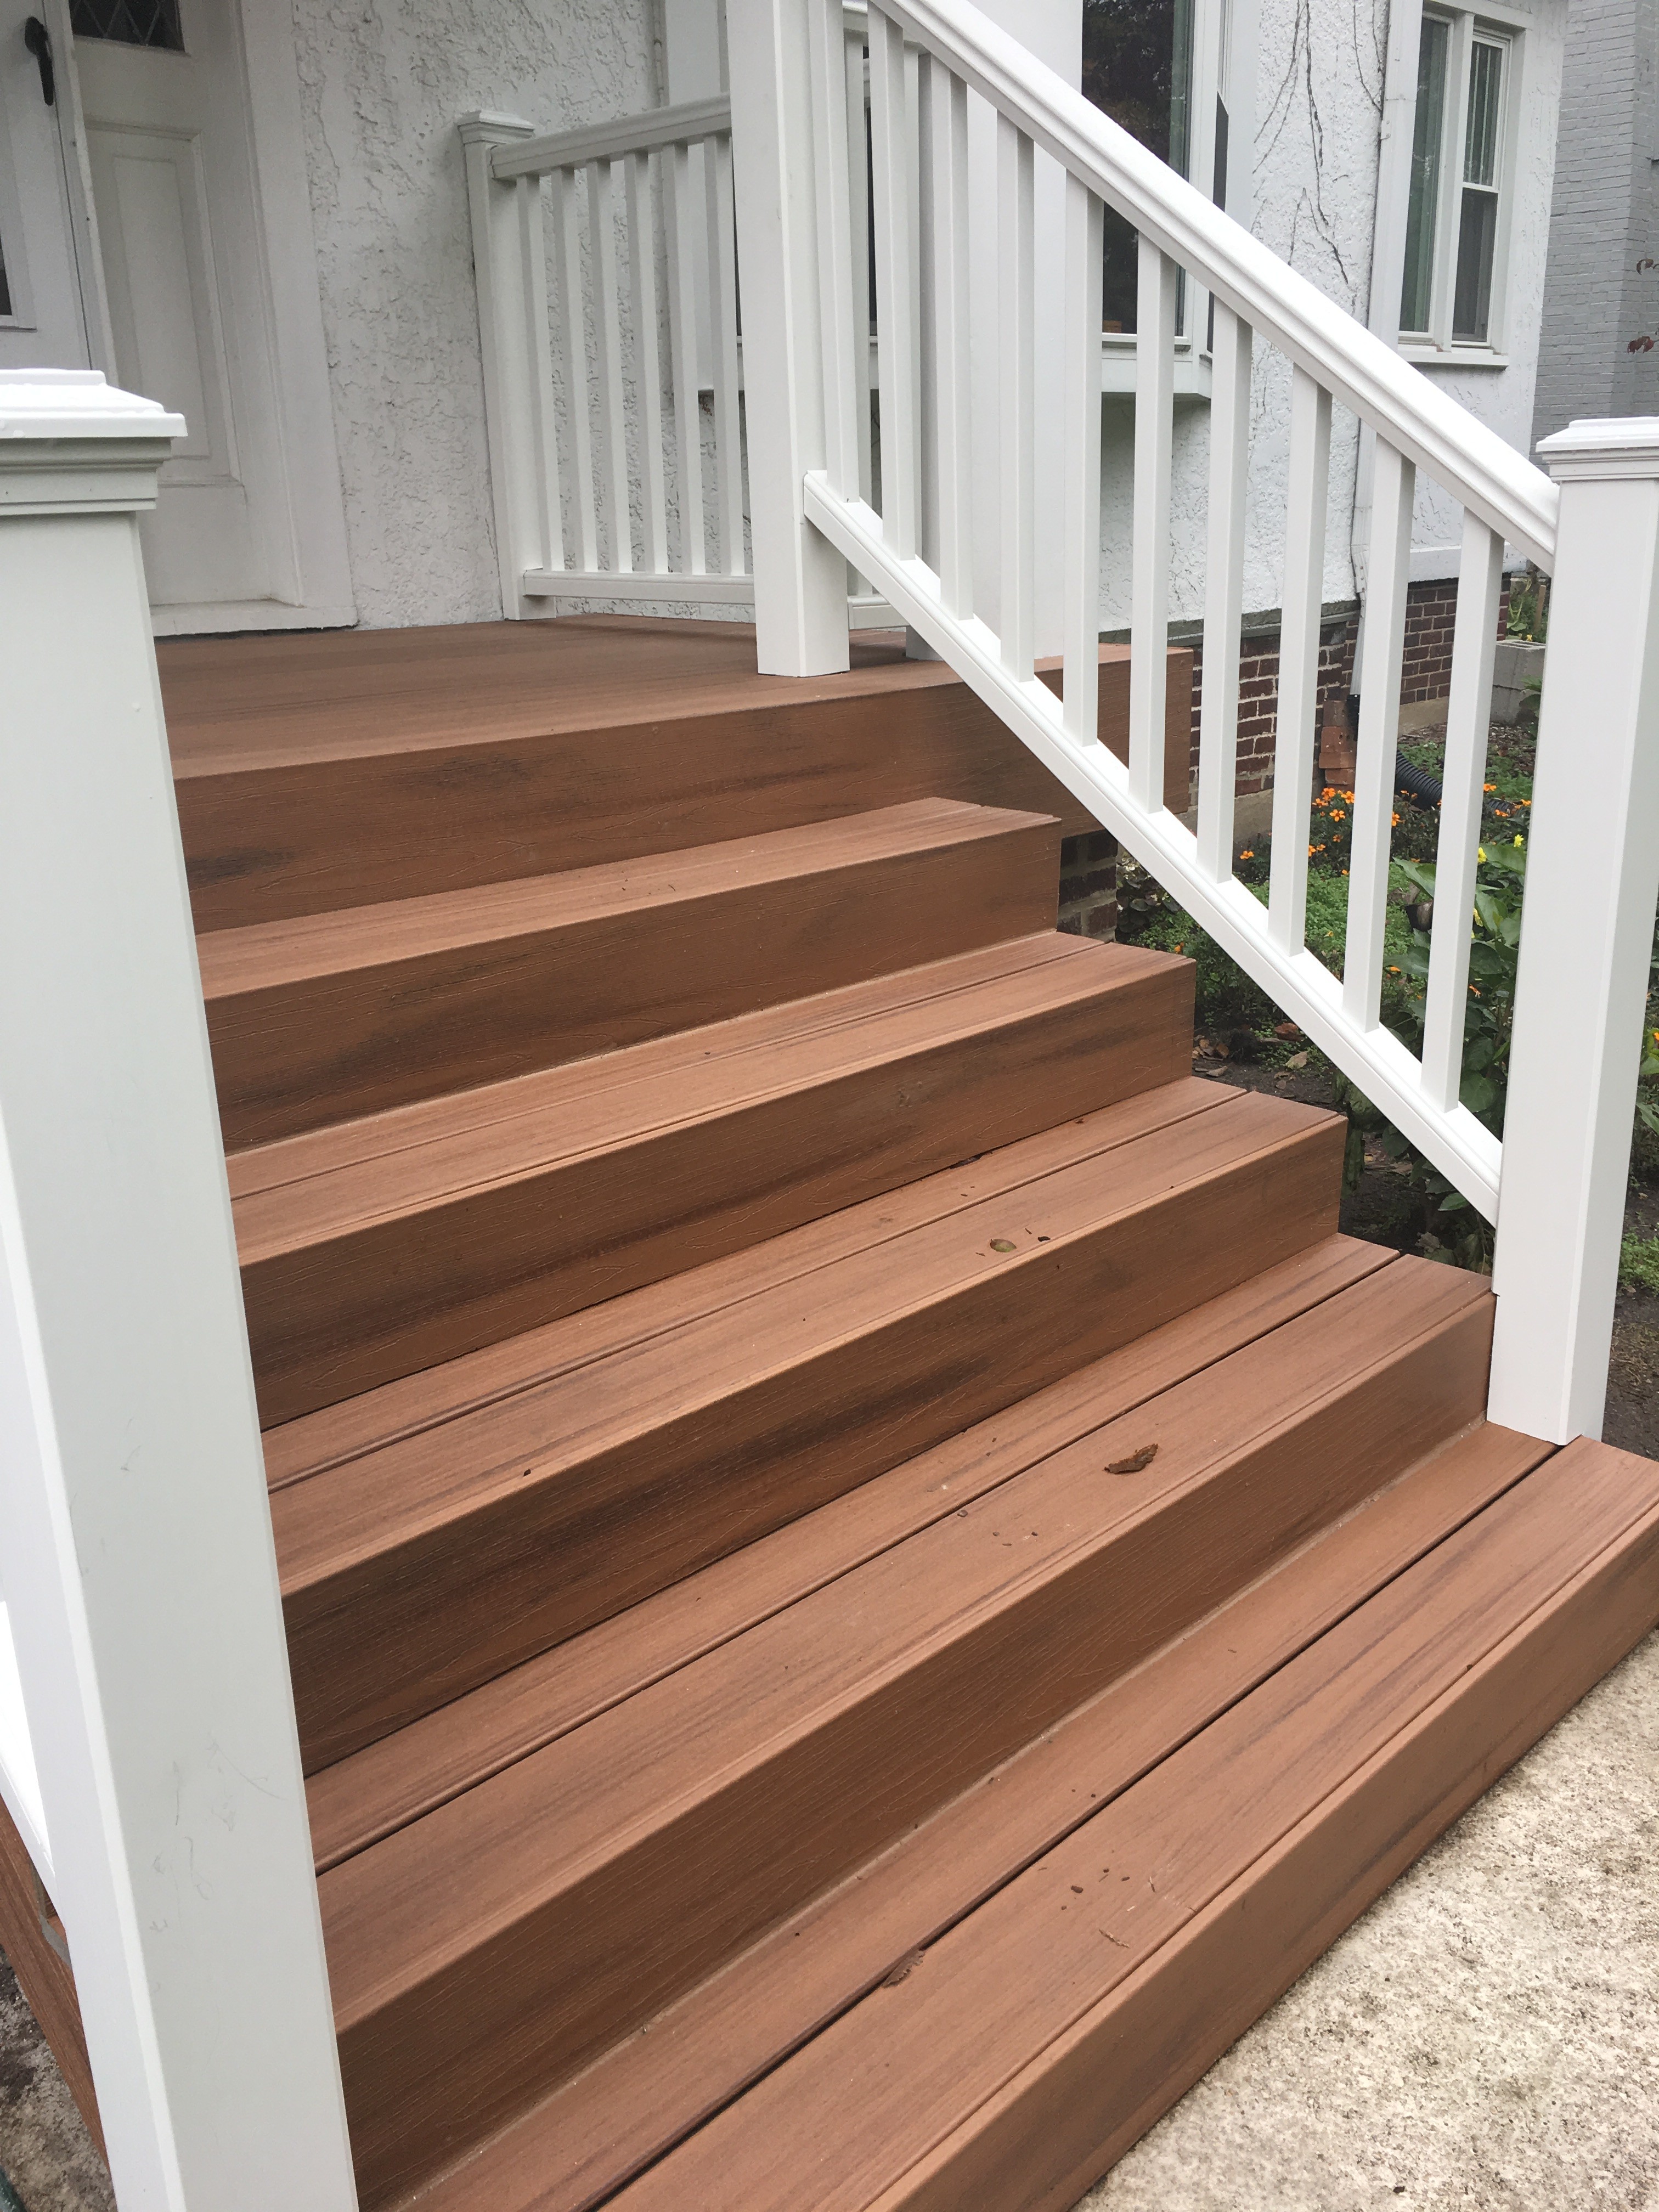 DECKS AND PORCH MATERIAL OPTIONS